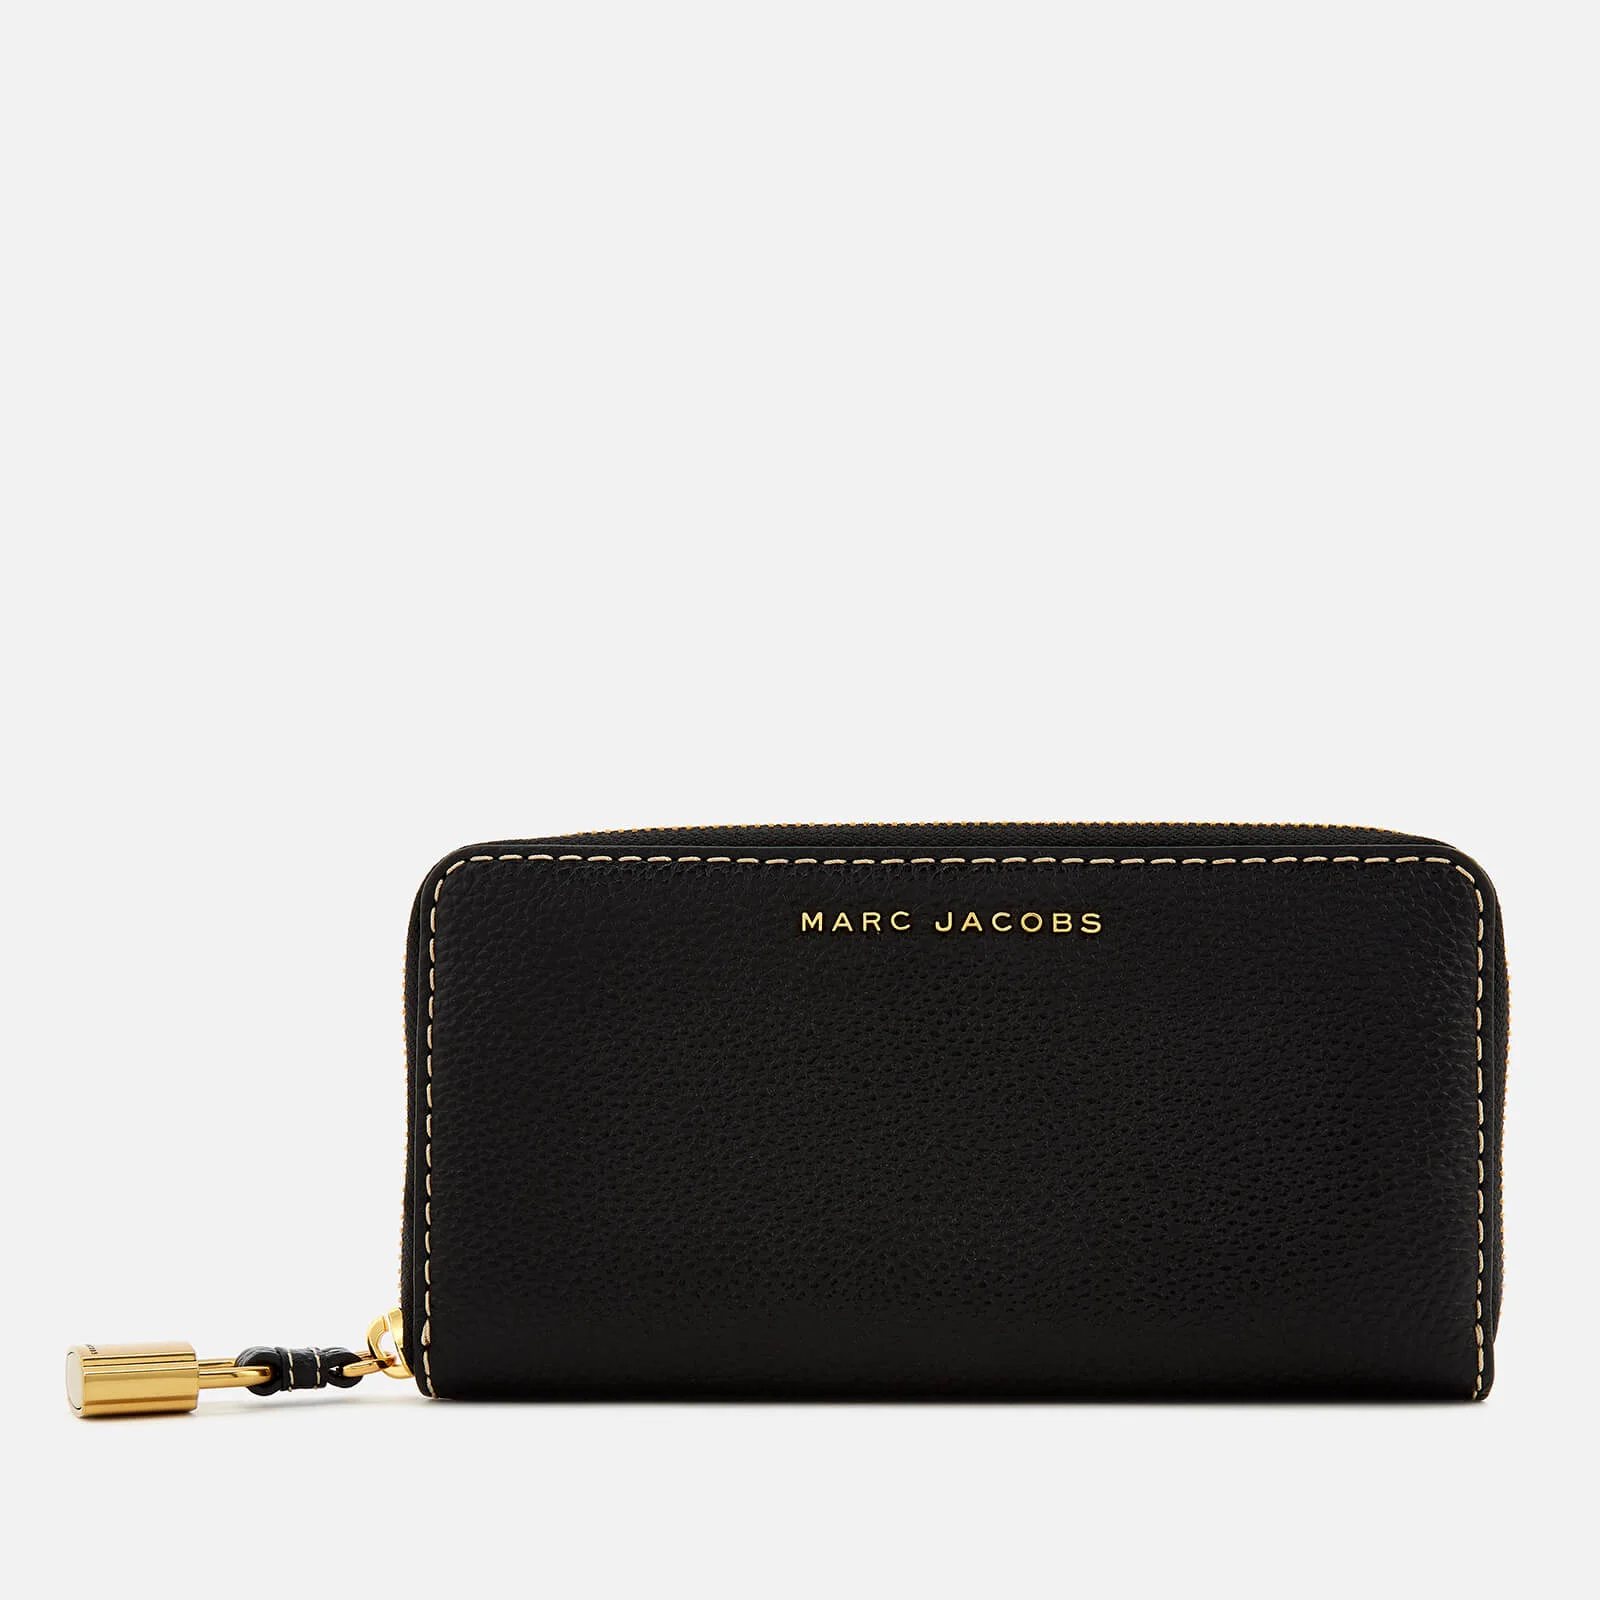 Marc Jacobs Women's The Grind Continental Wallet - Black Image 1